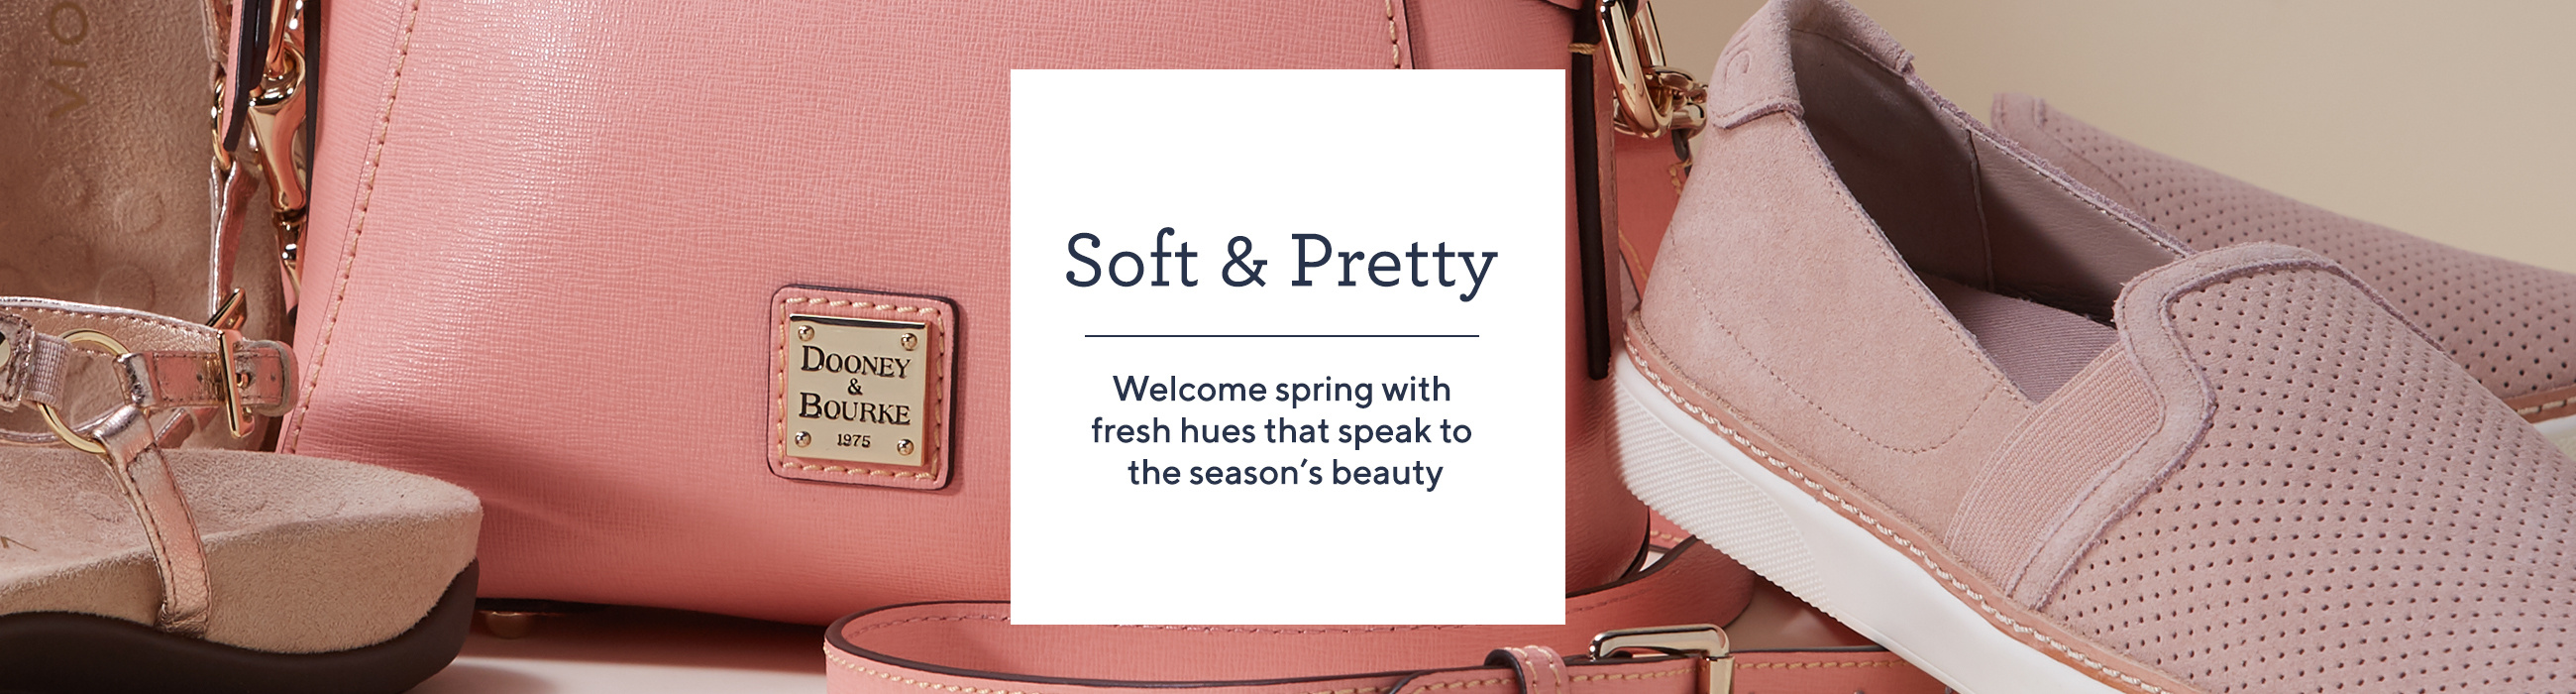 Soft & Pretty  Welcome spring with fresh hues that speak to the season's beauty